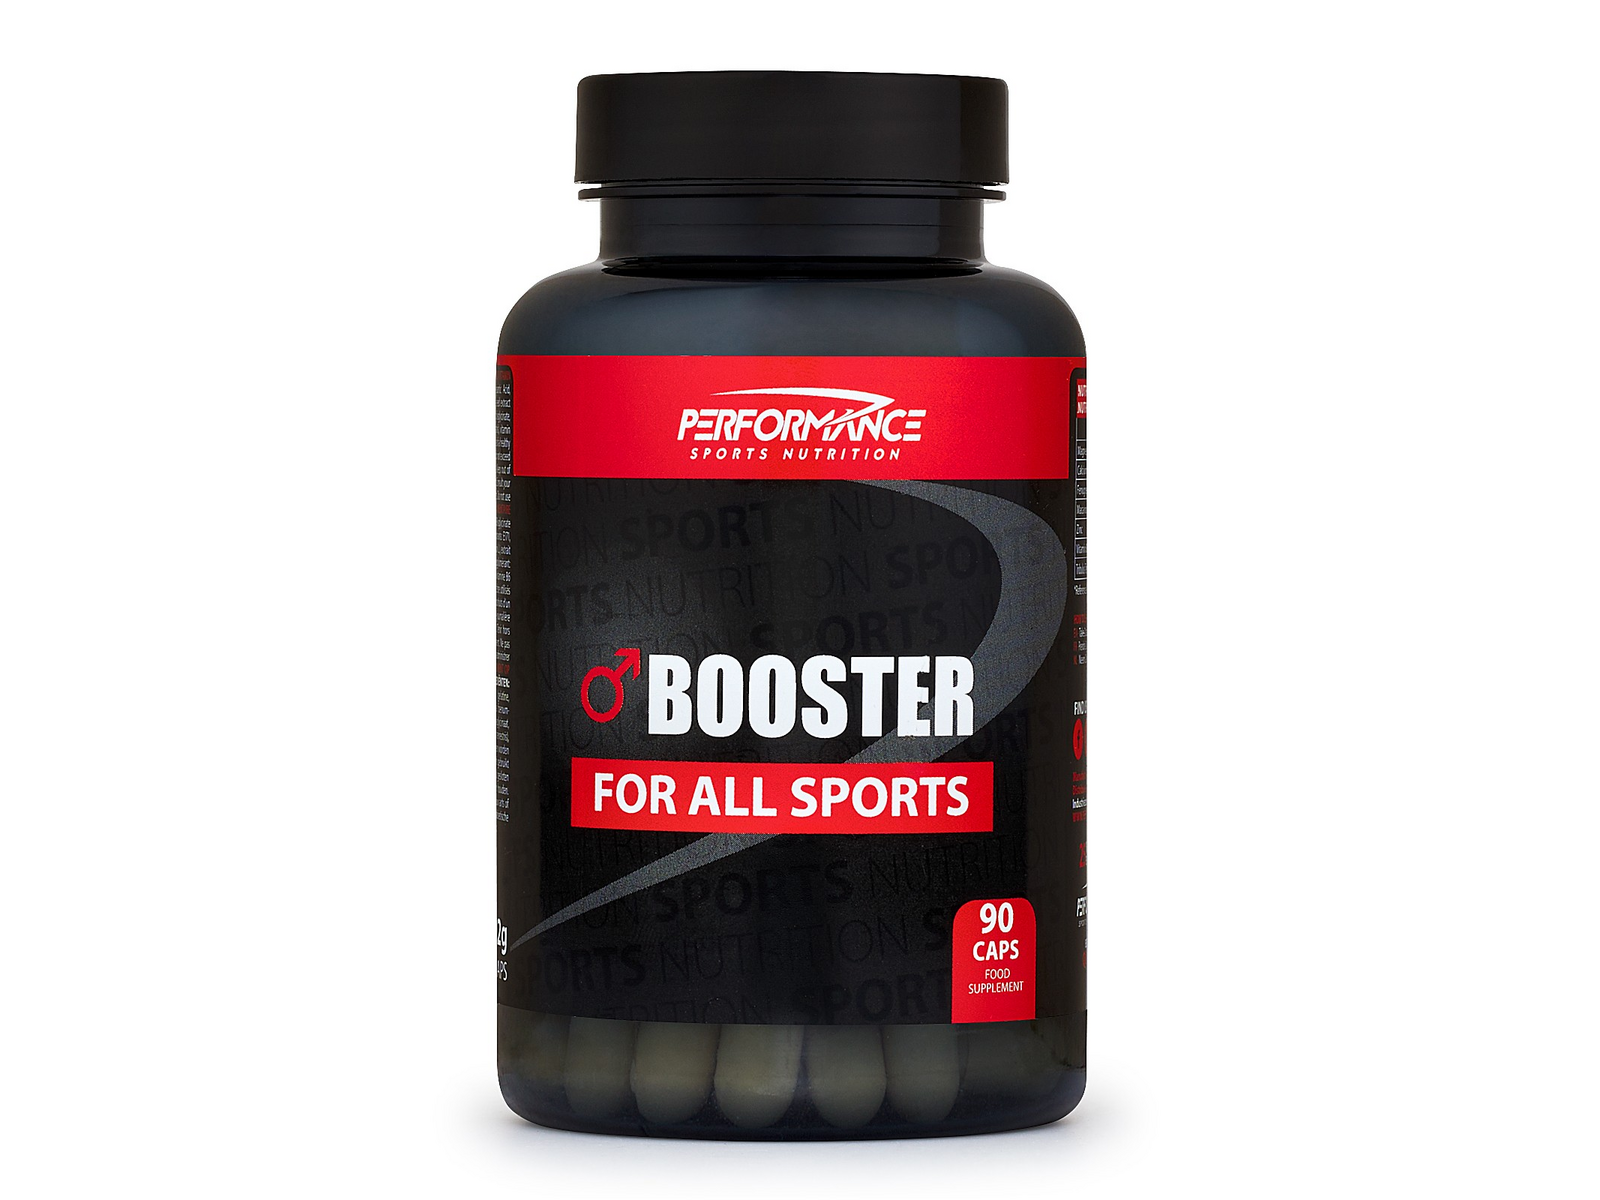 O Booster (90 capsules) - PERFORMANCE SPORTS NUTRITION